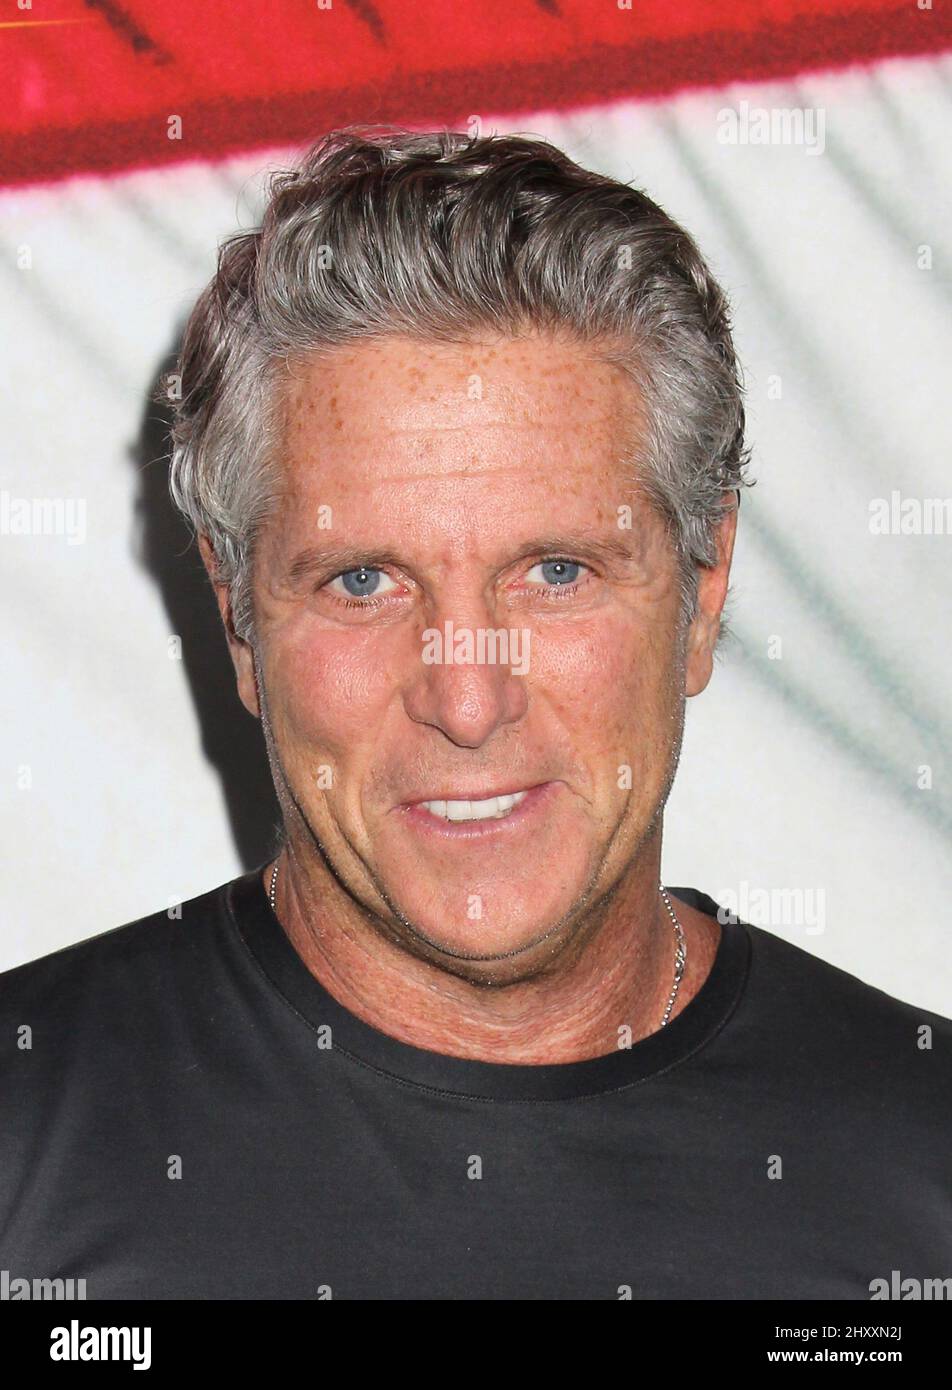 Donny Deutsch during the 'Game Change' premiere held at the Ziegfeld Theatre, New York Stock Photo